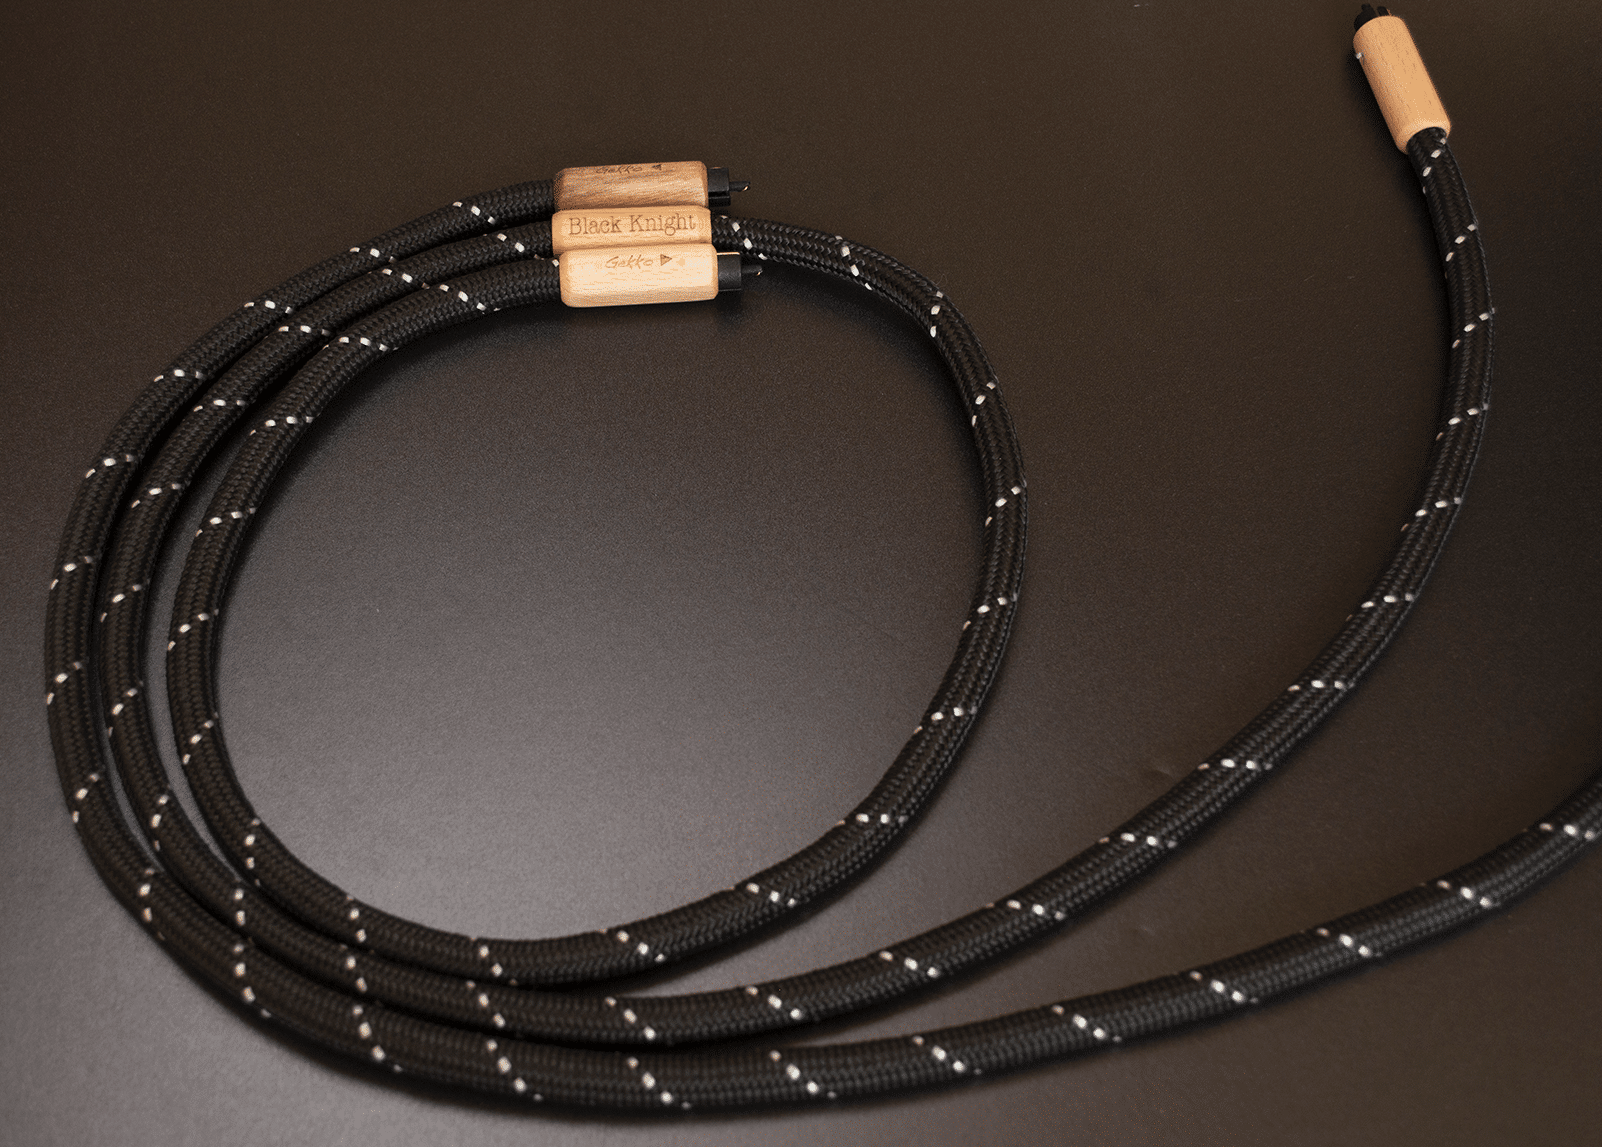 Black Knight Interconnect Cables By Gekko 